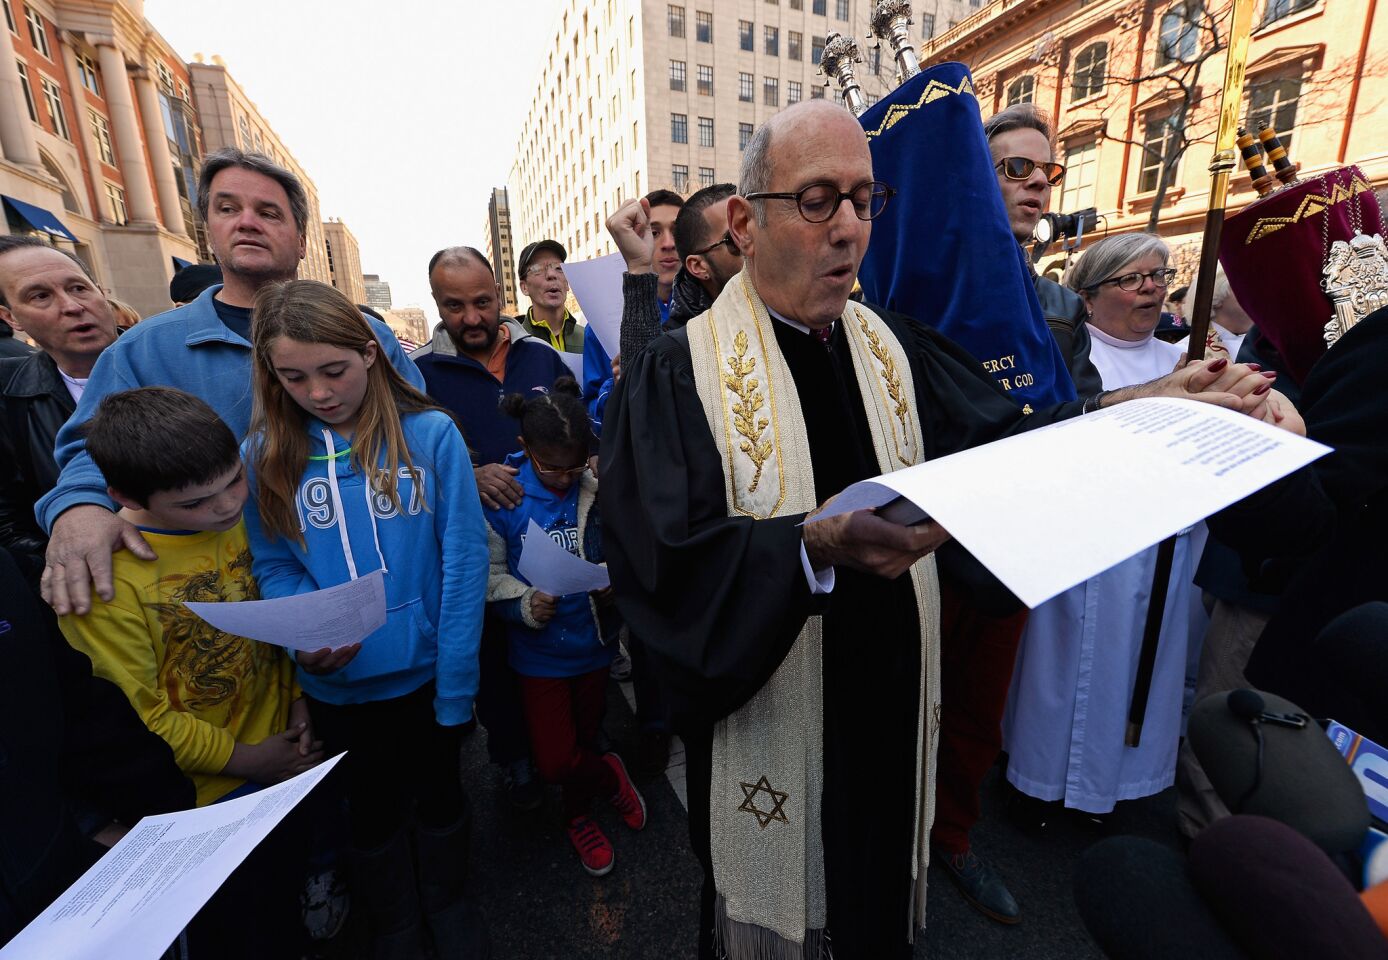 Memorials And Sunday Services Held In Honor Of Boston Marathon Bombing Victims